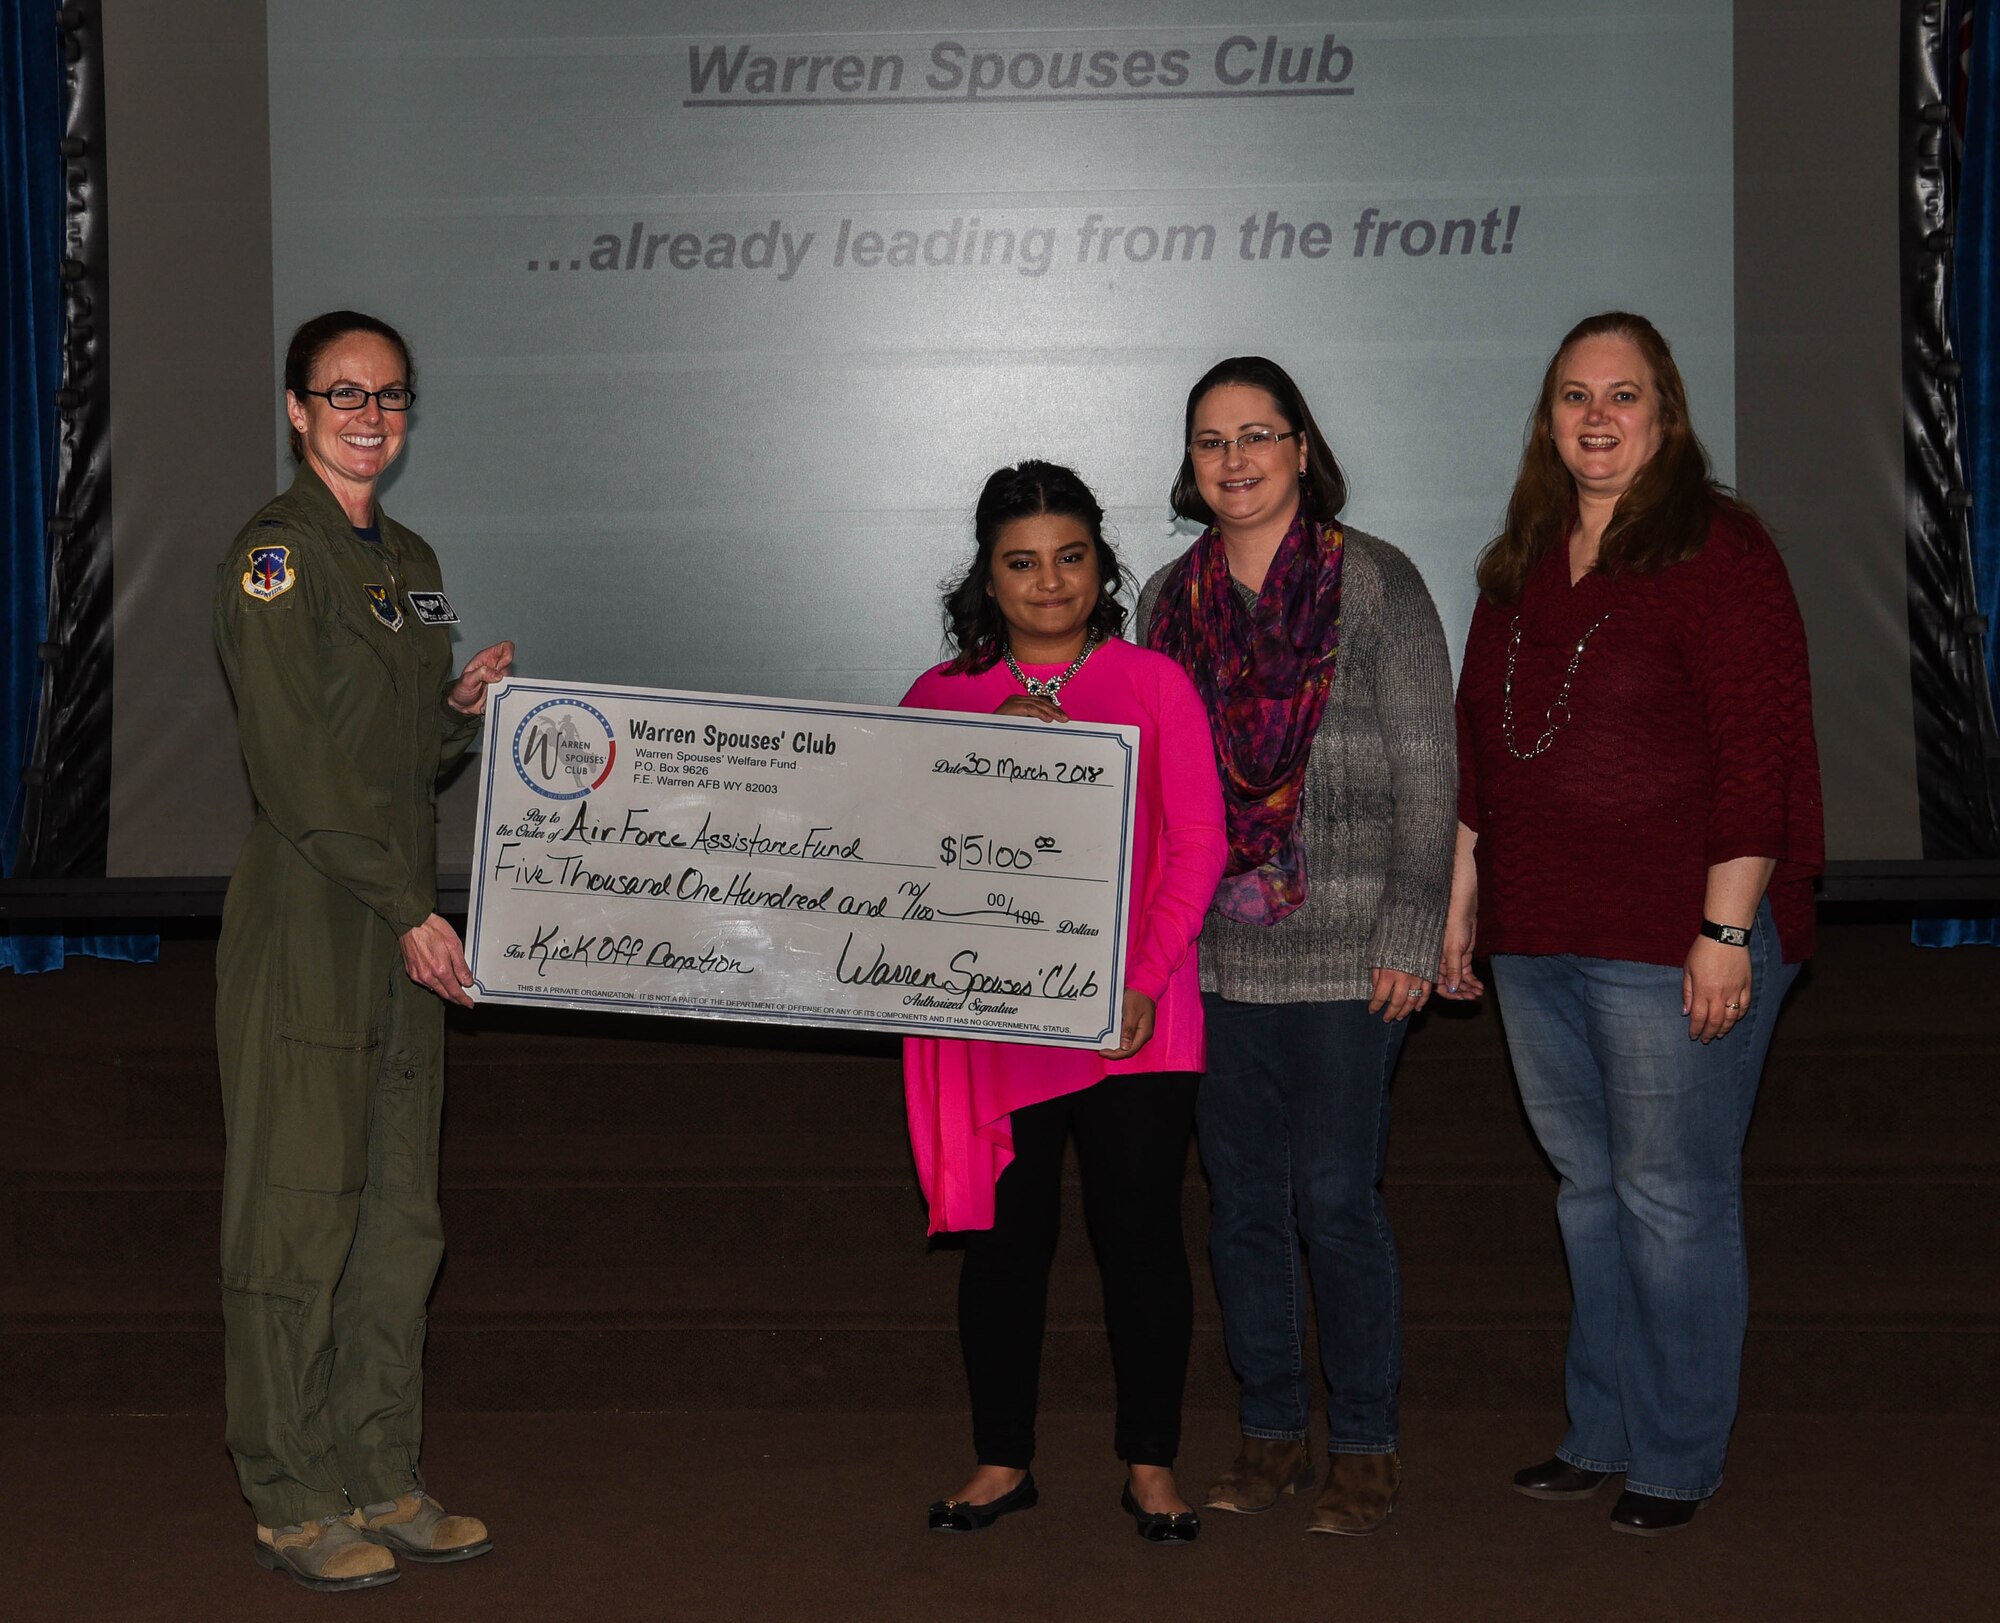 The Warren Spouse Club presented Col. Stacy Jo Huser, 90th Missile Wing commander, with a check for $5,100 for the Air Force Assistance Fund at F.E. Warren Air Force Base, Wyo., March 30, 2018. The WSC raised the money during a recent auction event, Boots and Baubles. AFAF helps Airmen with financial aid in instances such as, emergency situations, securing a retirement home for widows or widowers of Air Force members and more. (U.S. Air Force photo by Airman 1st Class Braydon Williams)